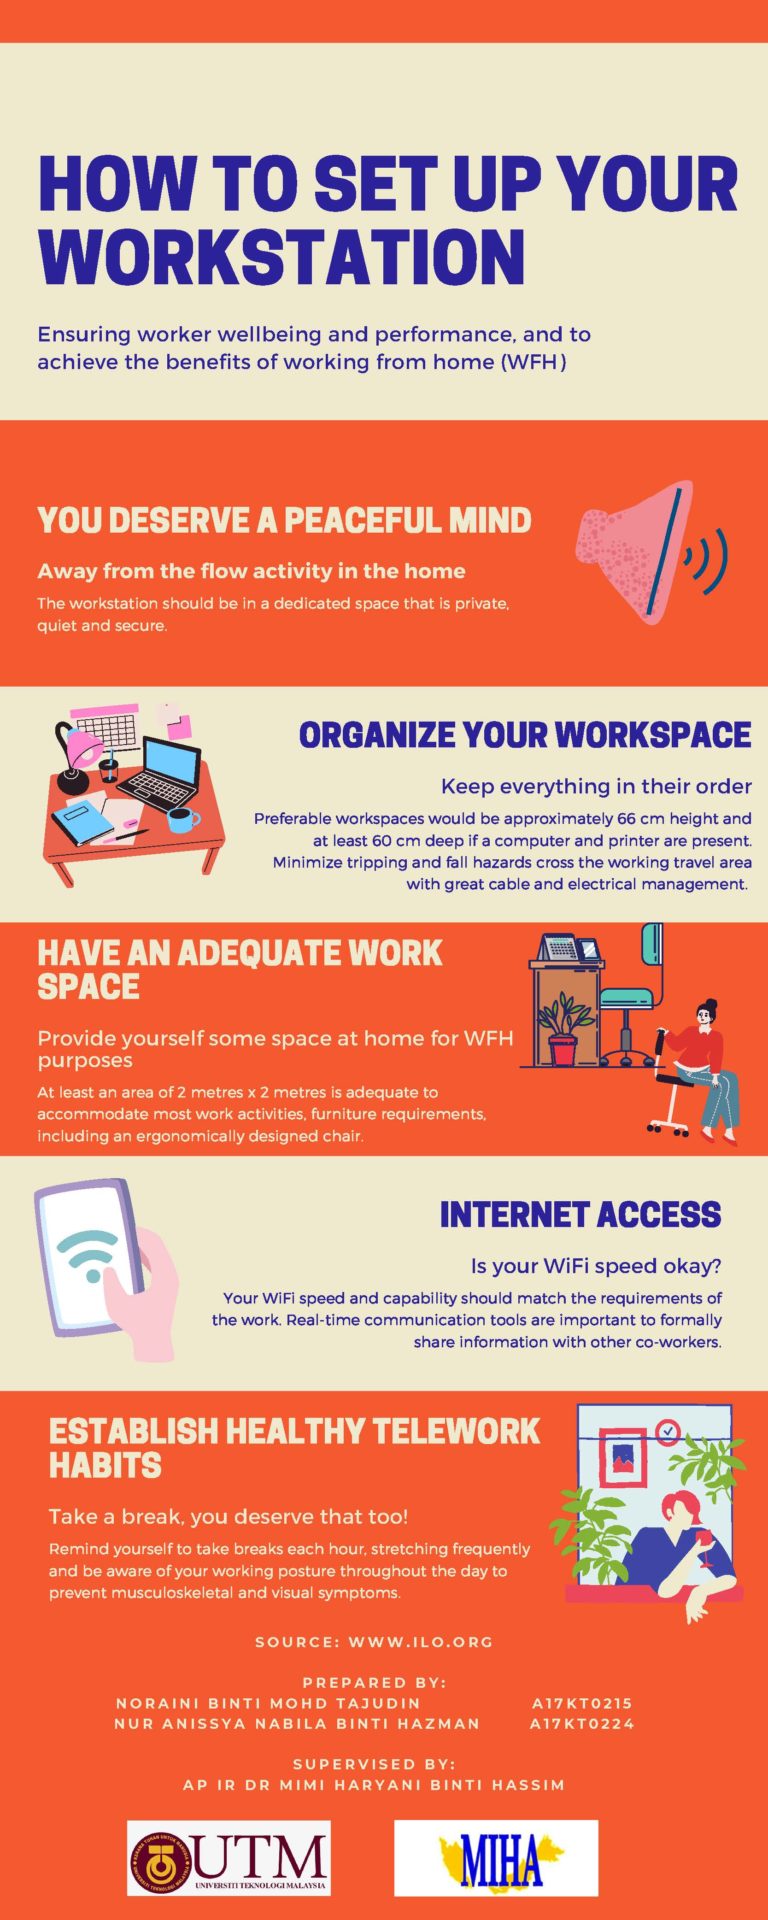 How to setup your work station